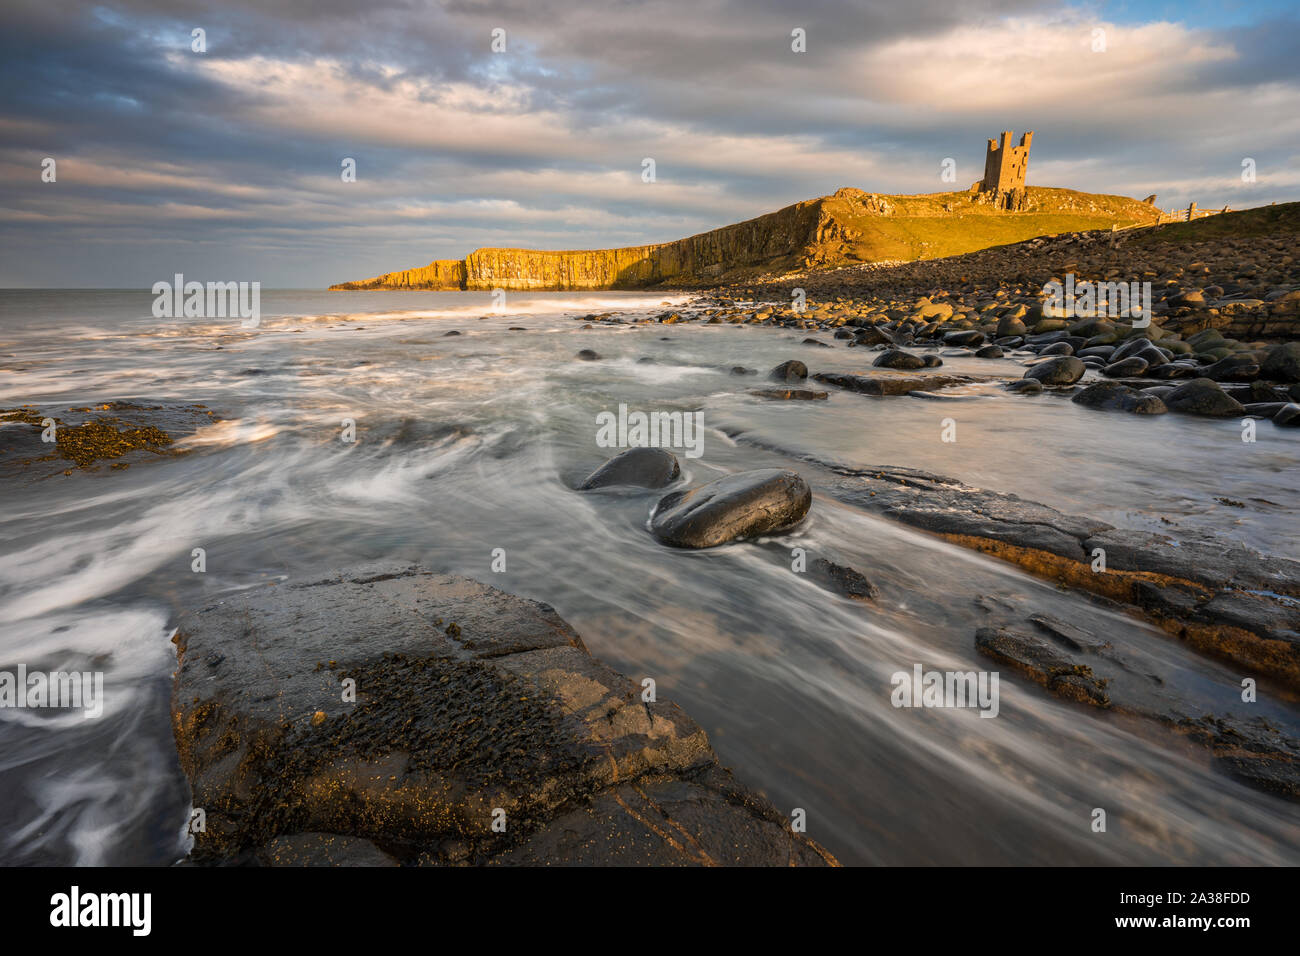 The ruins of Dunstanburgh Castle perch on the cliff above Embleton Bay as the North Sea waves break around the dolerite boulders along the shoreline. Stock Photo